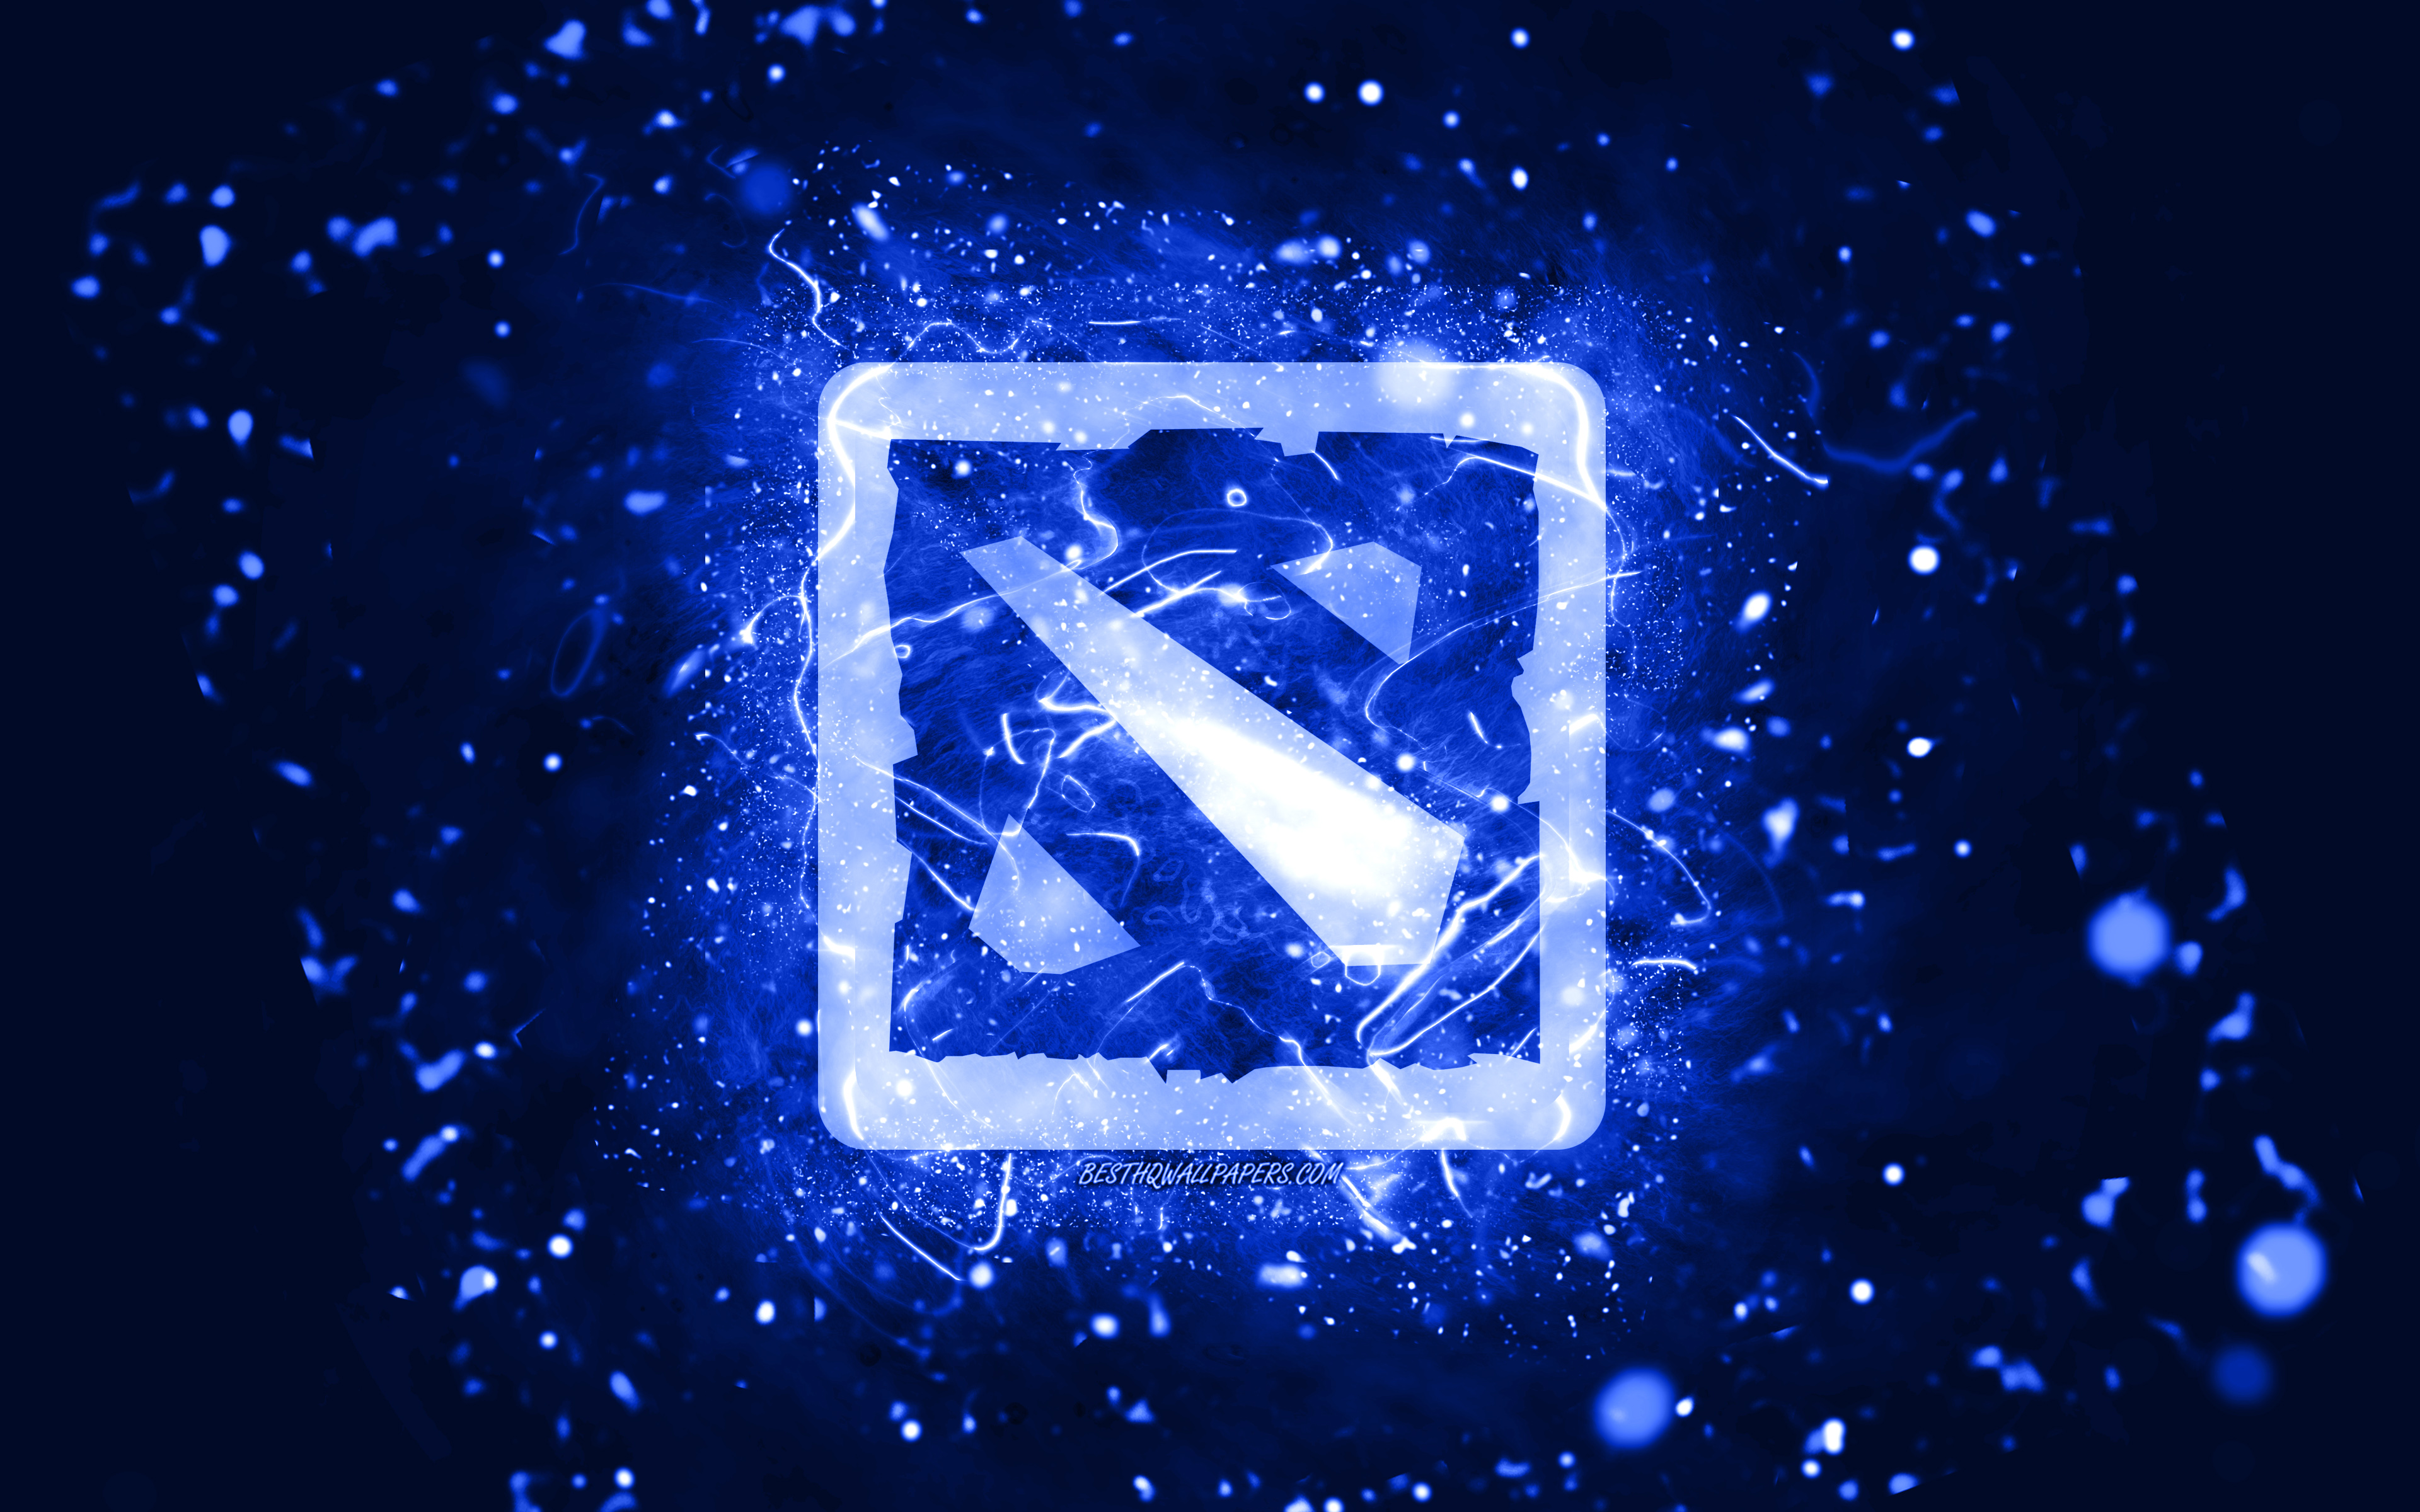 Download wallpapers Dota 2 dark blue logo, 4k, dark blue neon lights,  creative, dark blue abstract background, Dota 2 logo, online games, Dota 2  for desktop with resolution 3840x2400. High Quality HD pictures wallpapers